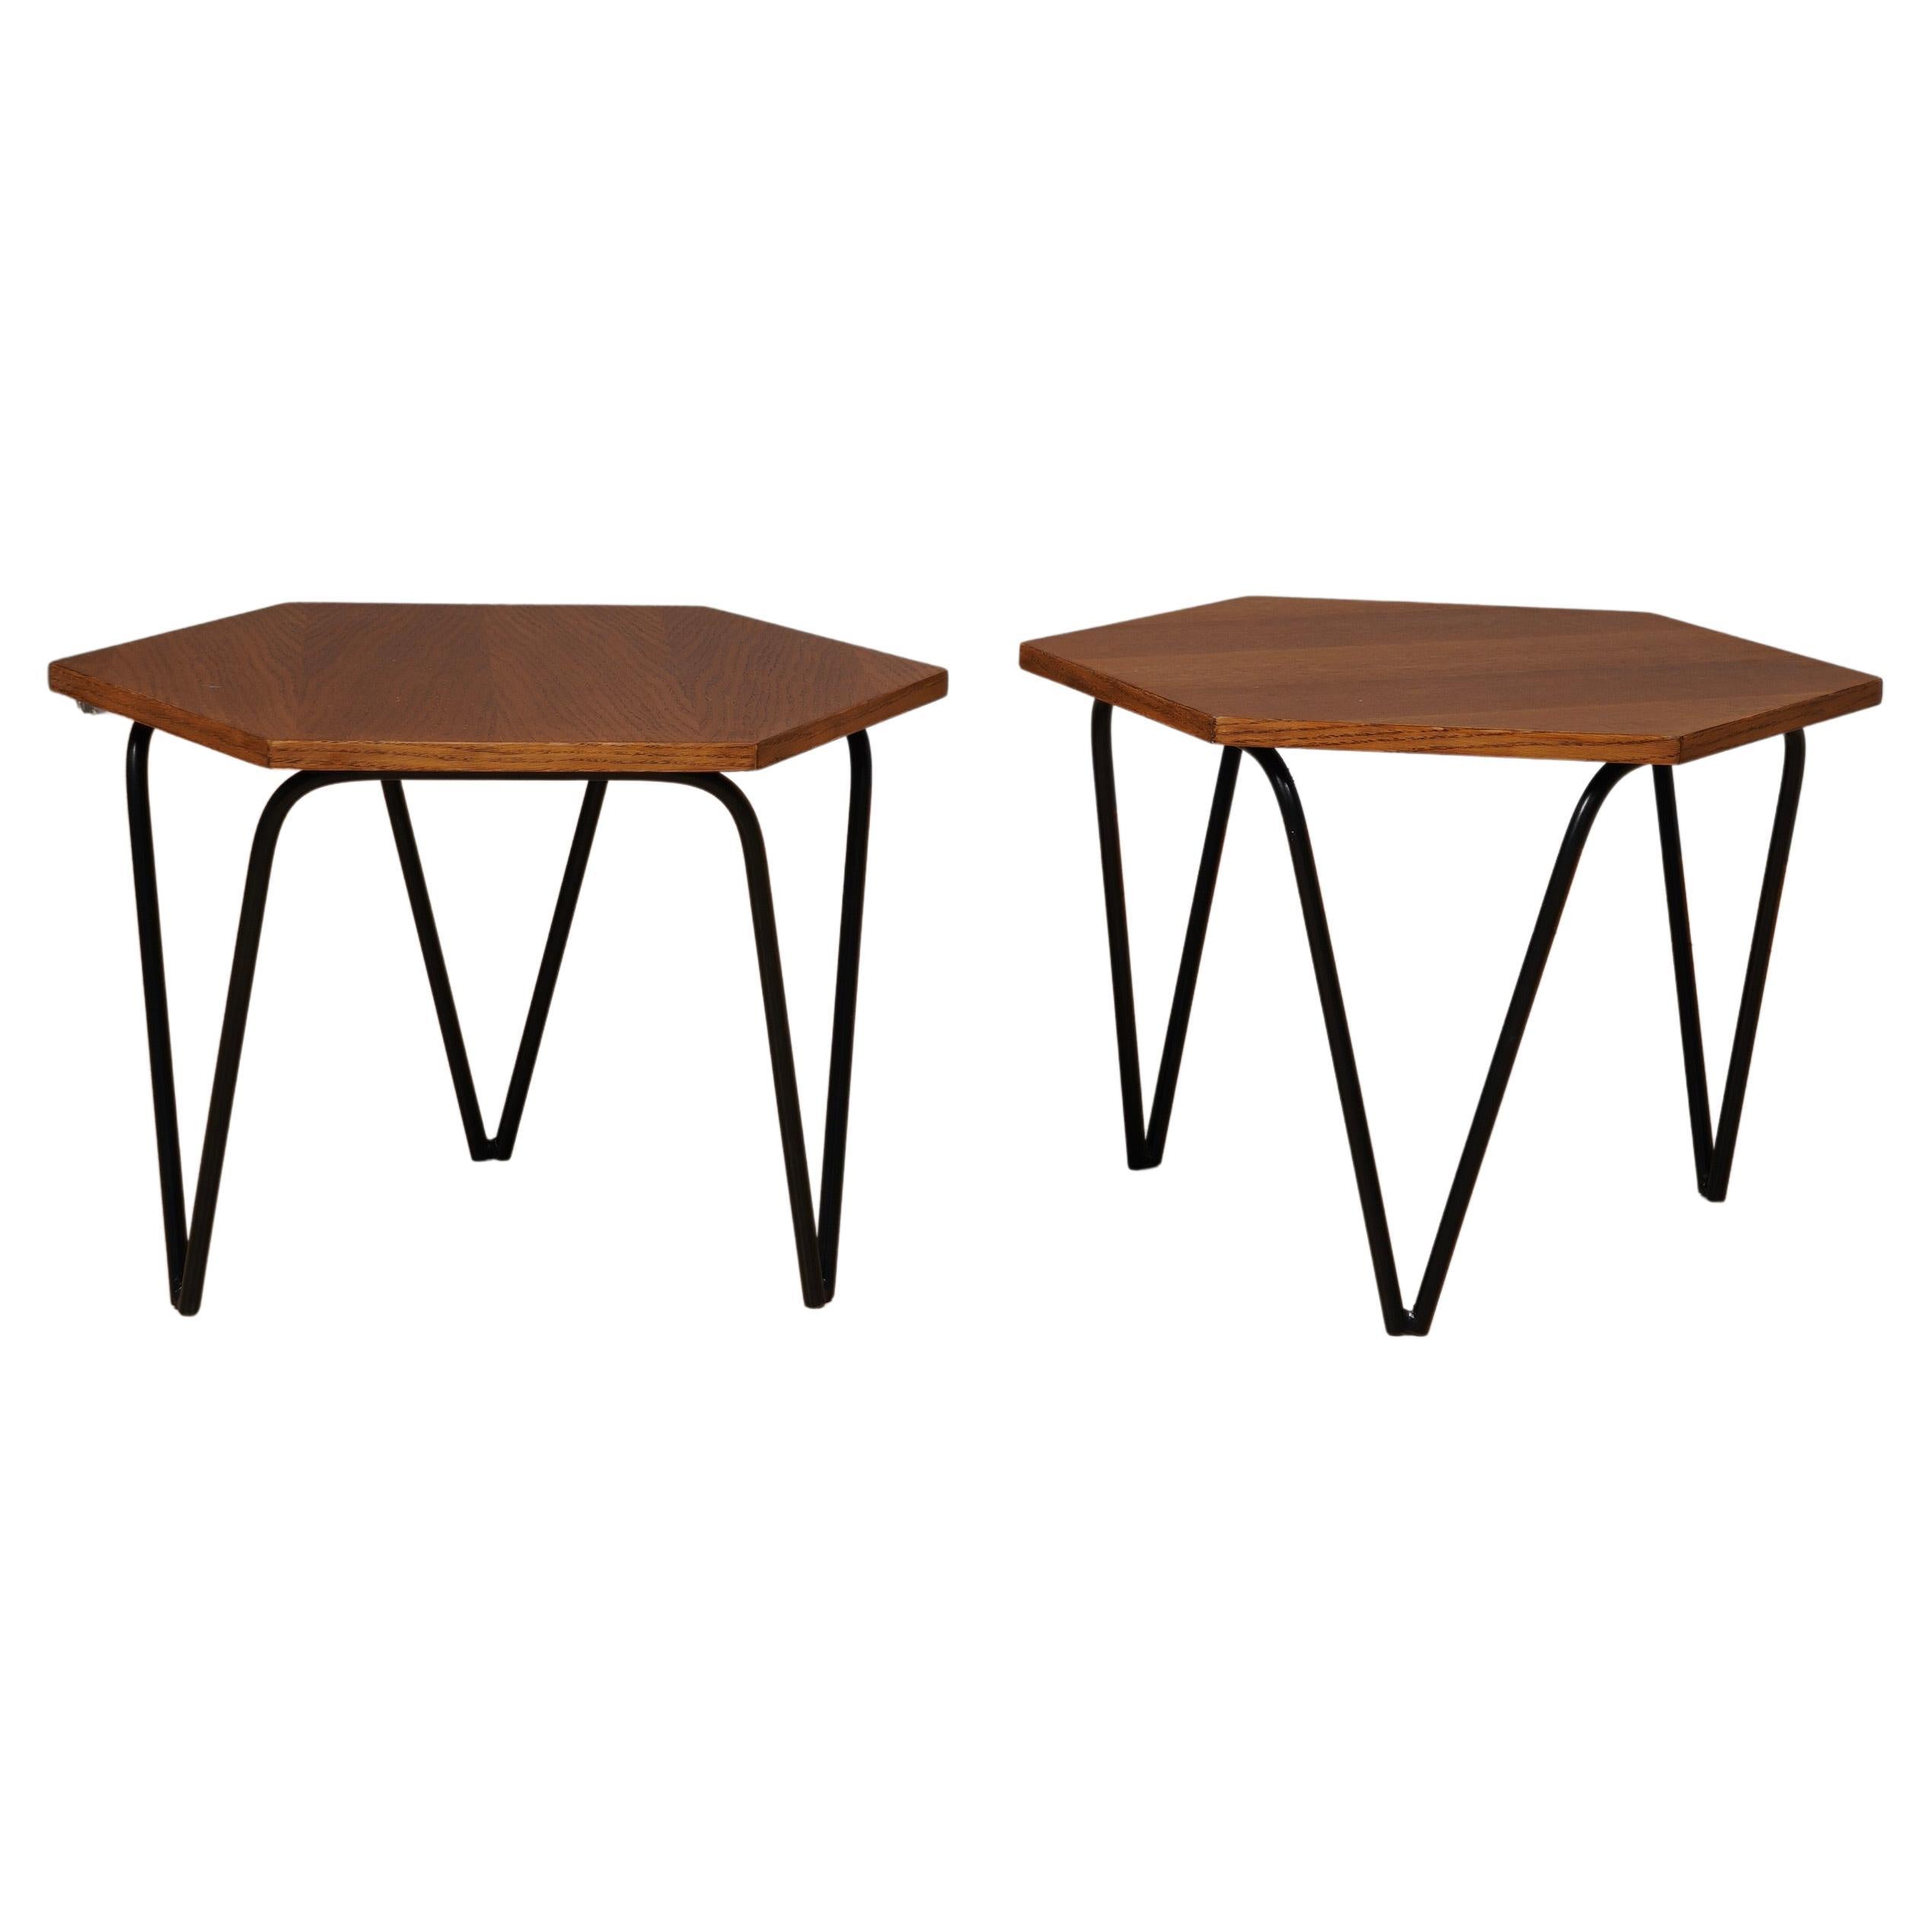 Gio Ponti ISA Manufacturing Hexagonal Wood and Iron Side Table, 1960 For Sale